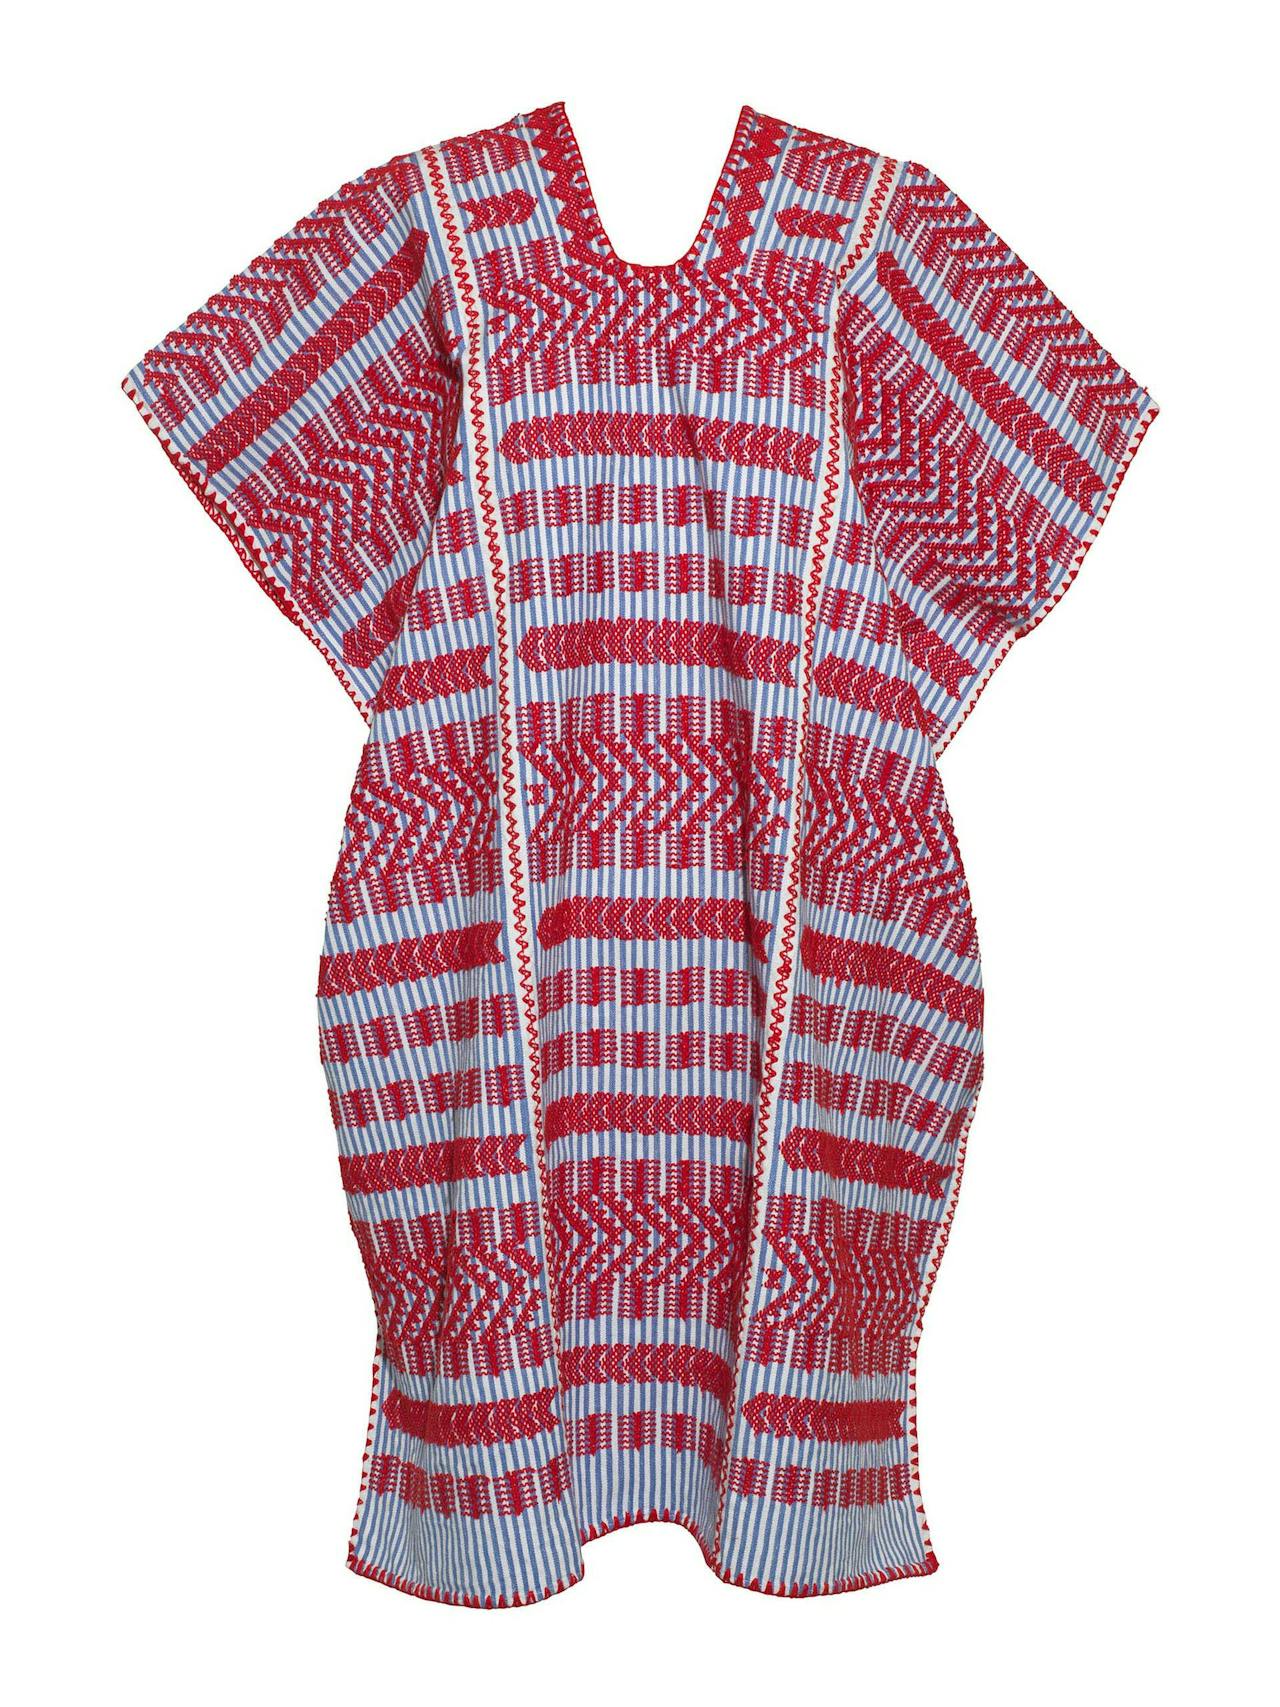 Three panel mini kaftan in blue, white and red